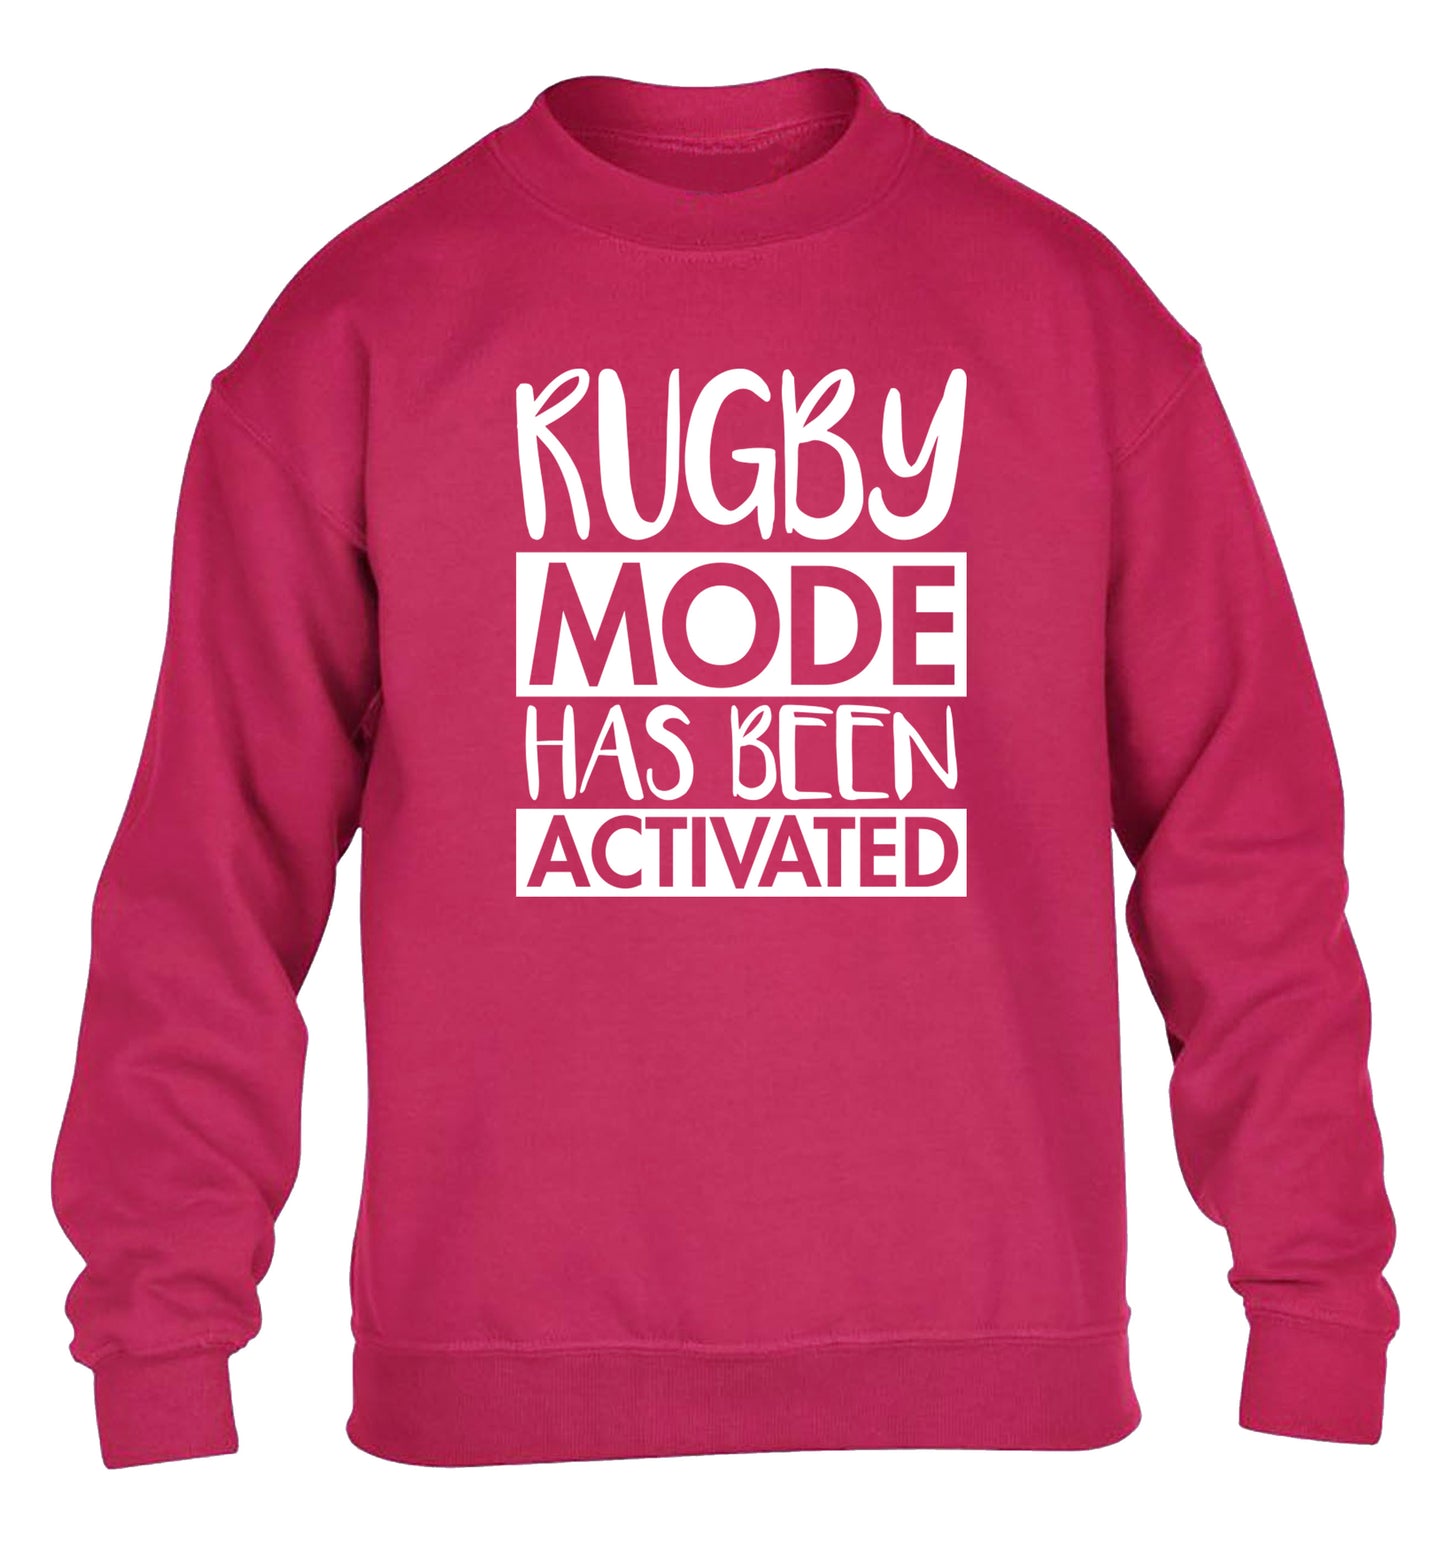 Rugby mode activated children's pink sweater 12-13 Years